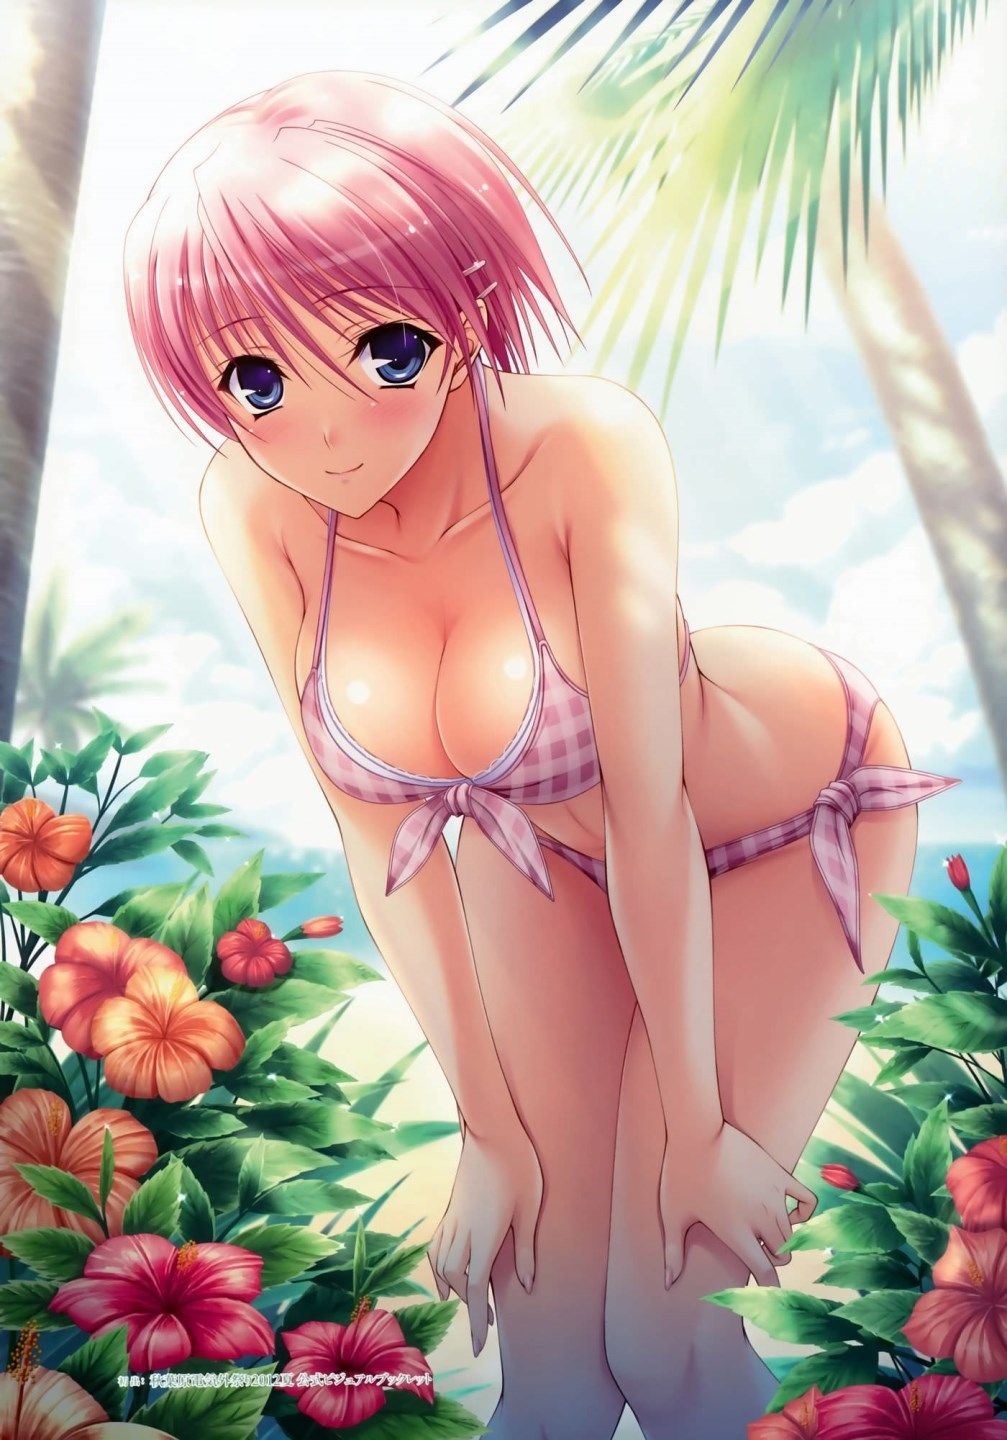 [39 pieces] Heavy breast eroticism image of the big breasts of the pink hair which is good if I call it lewd pink 38